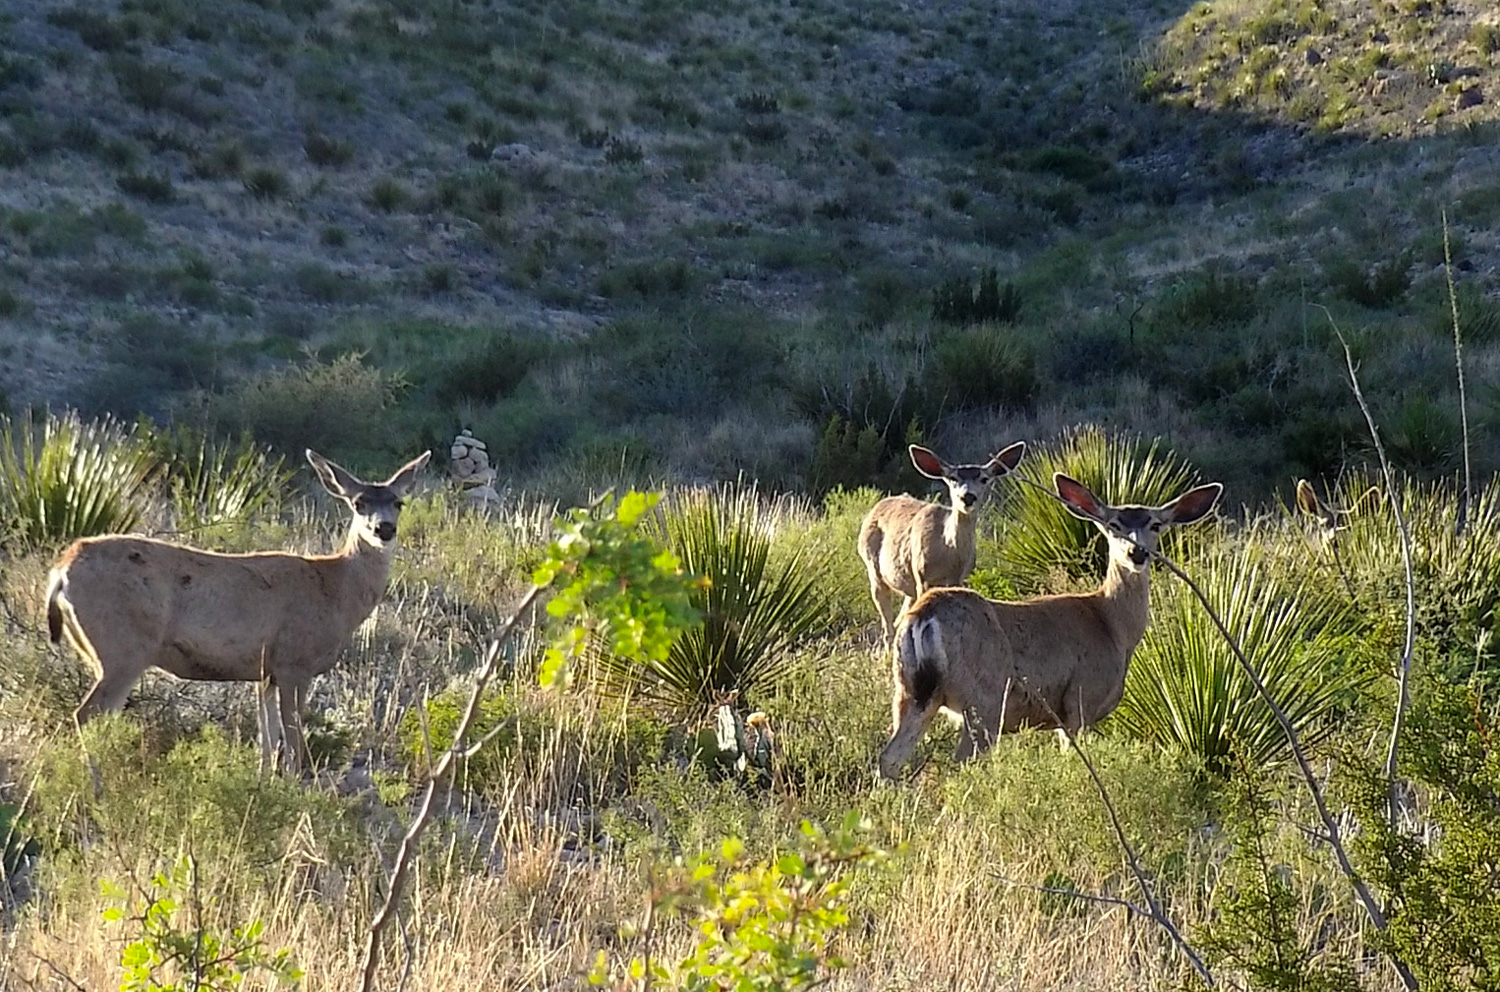 Four deer with ears perked out